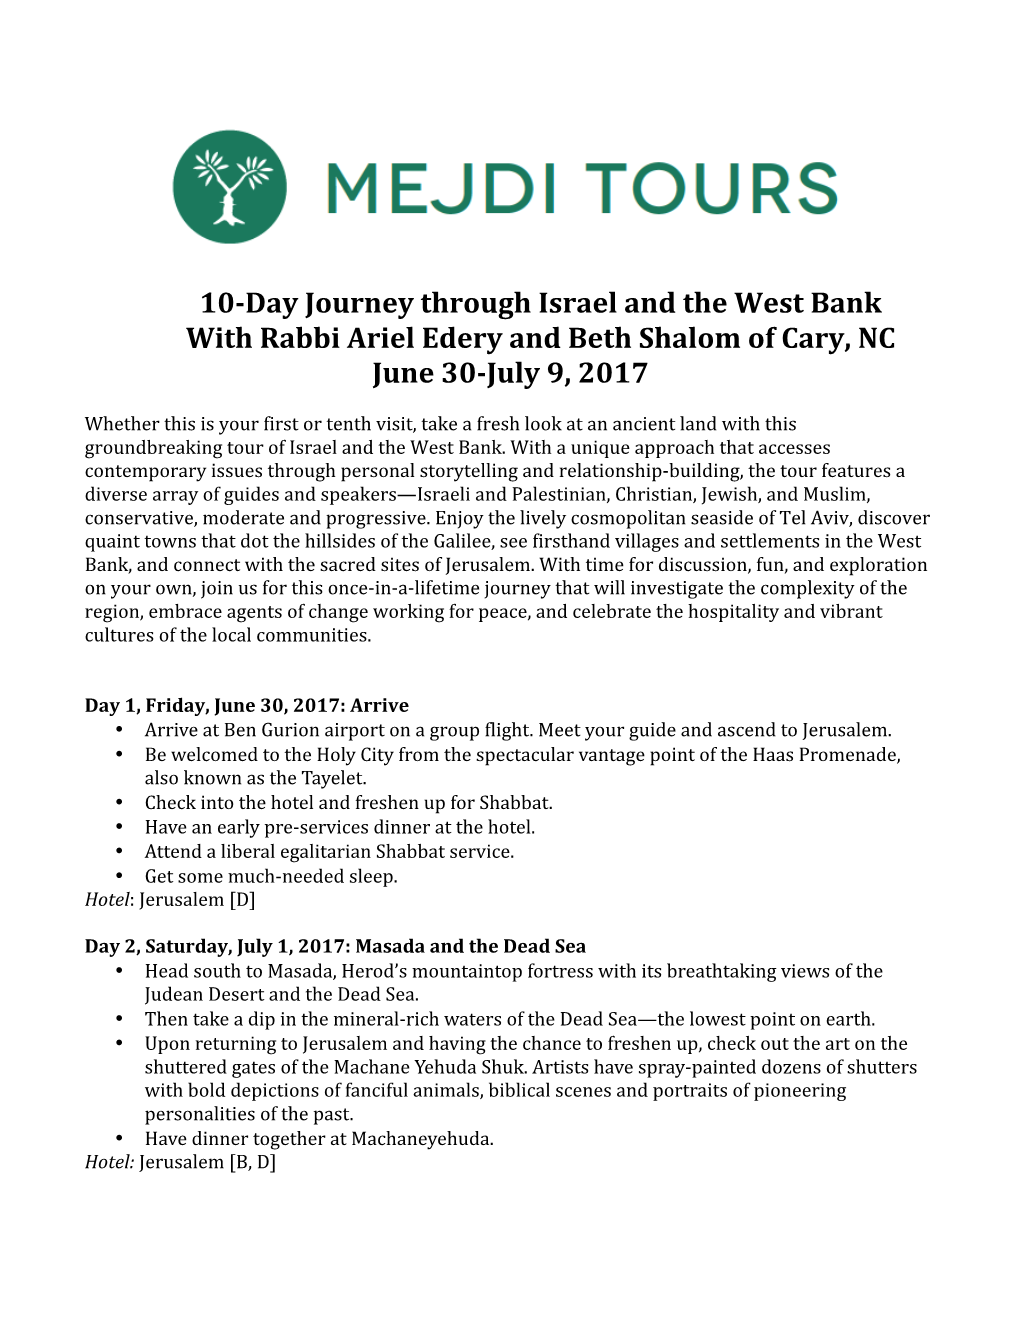 Day Journey Through Israel and the West Bank with Rabbi Ariel Edery and Beth Shalom of Cary, NC June 30-July 9, 2017